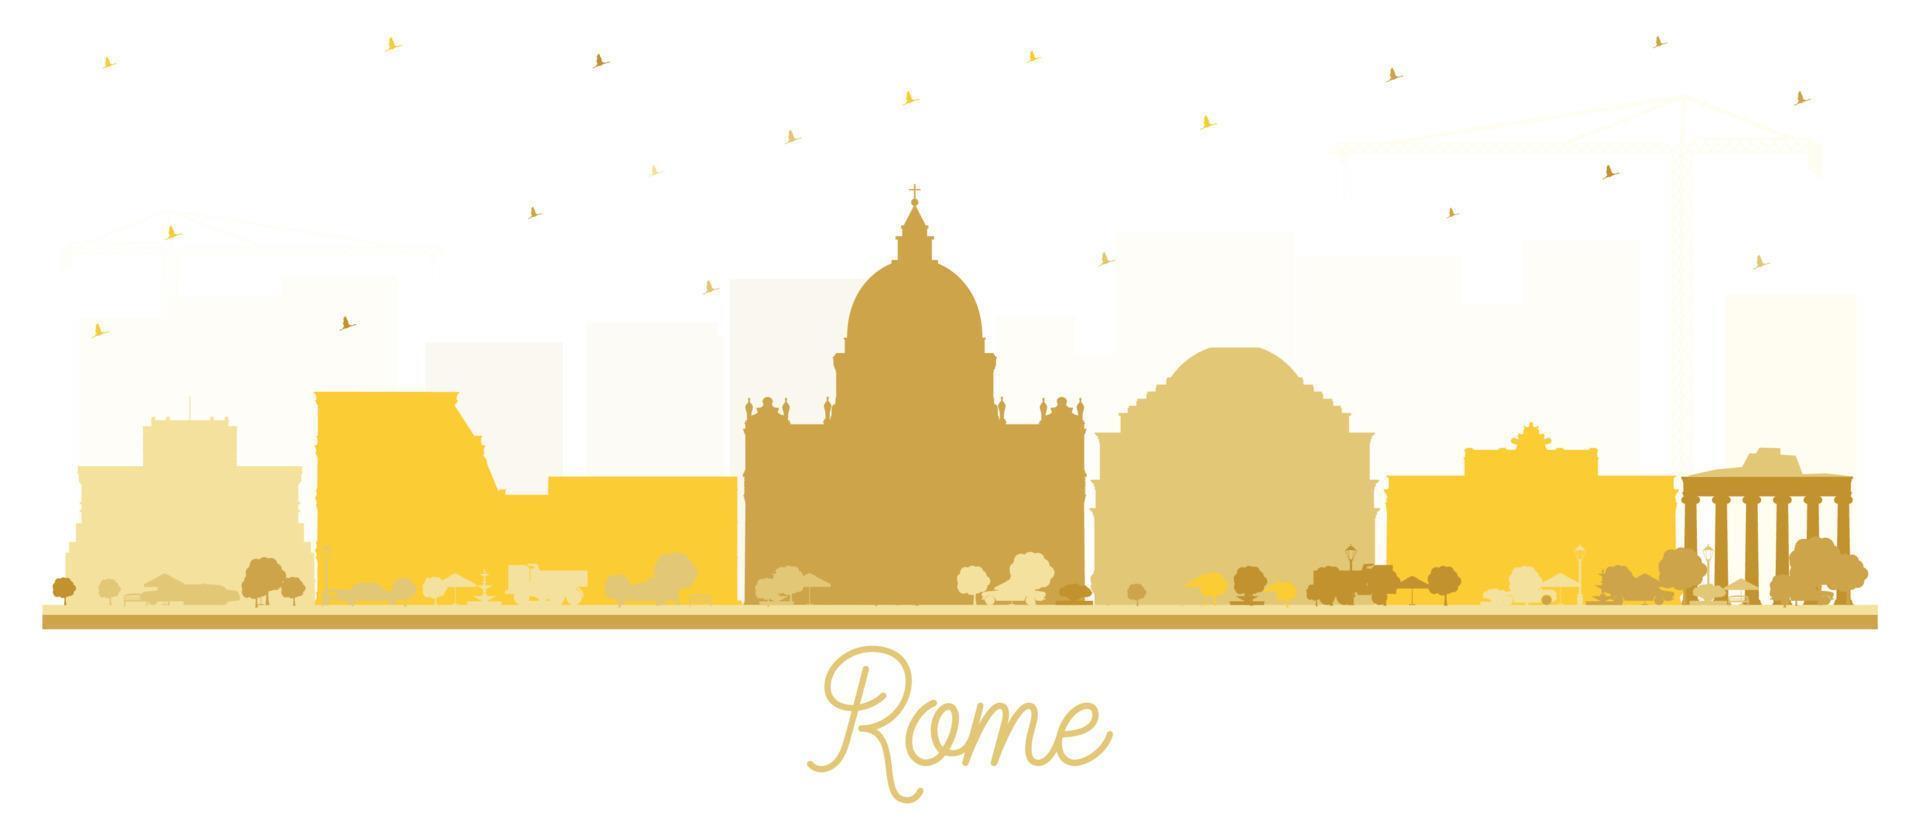 Rome Italy City Skyline Silhouette with Golden Buildings Isolated on White. vector